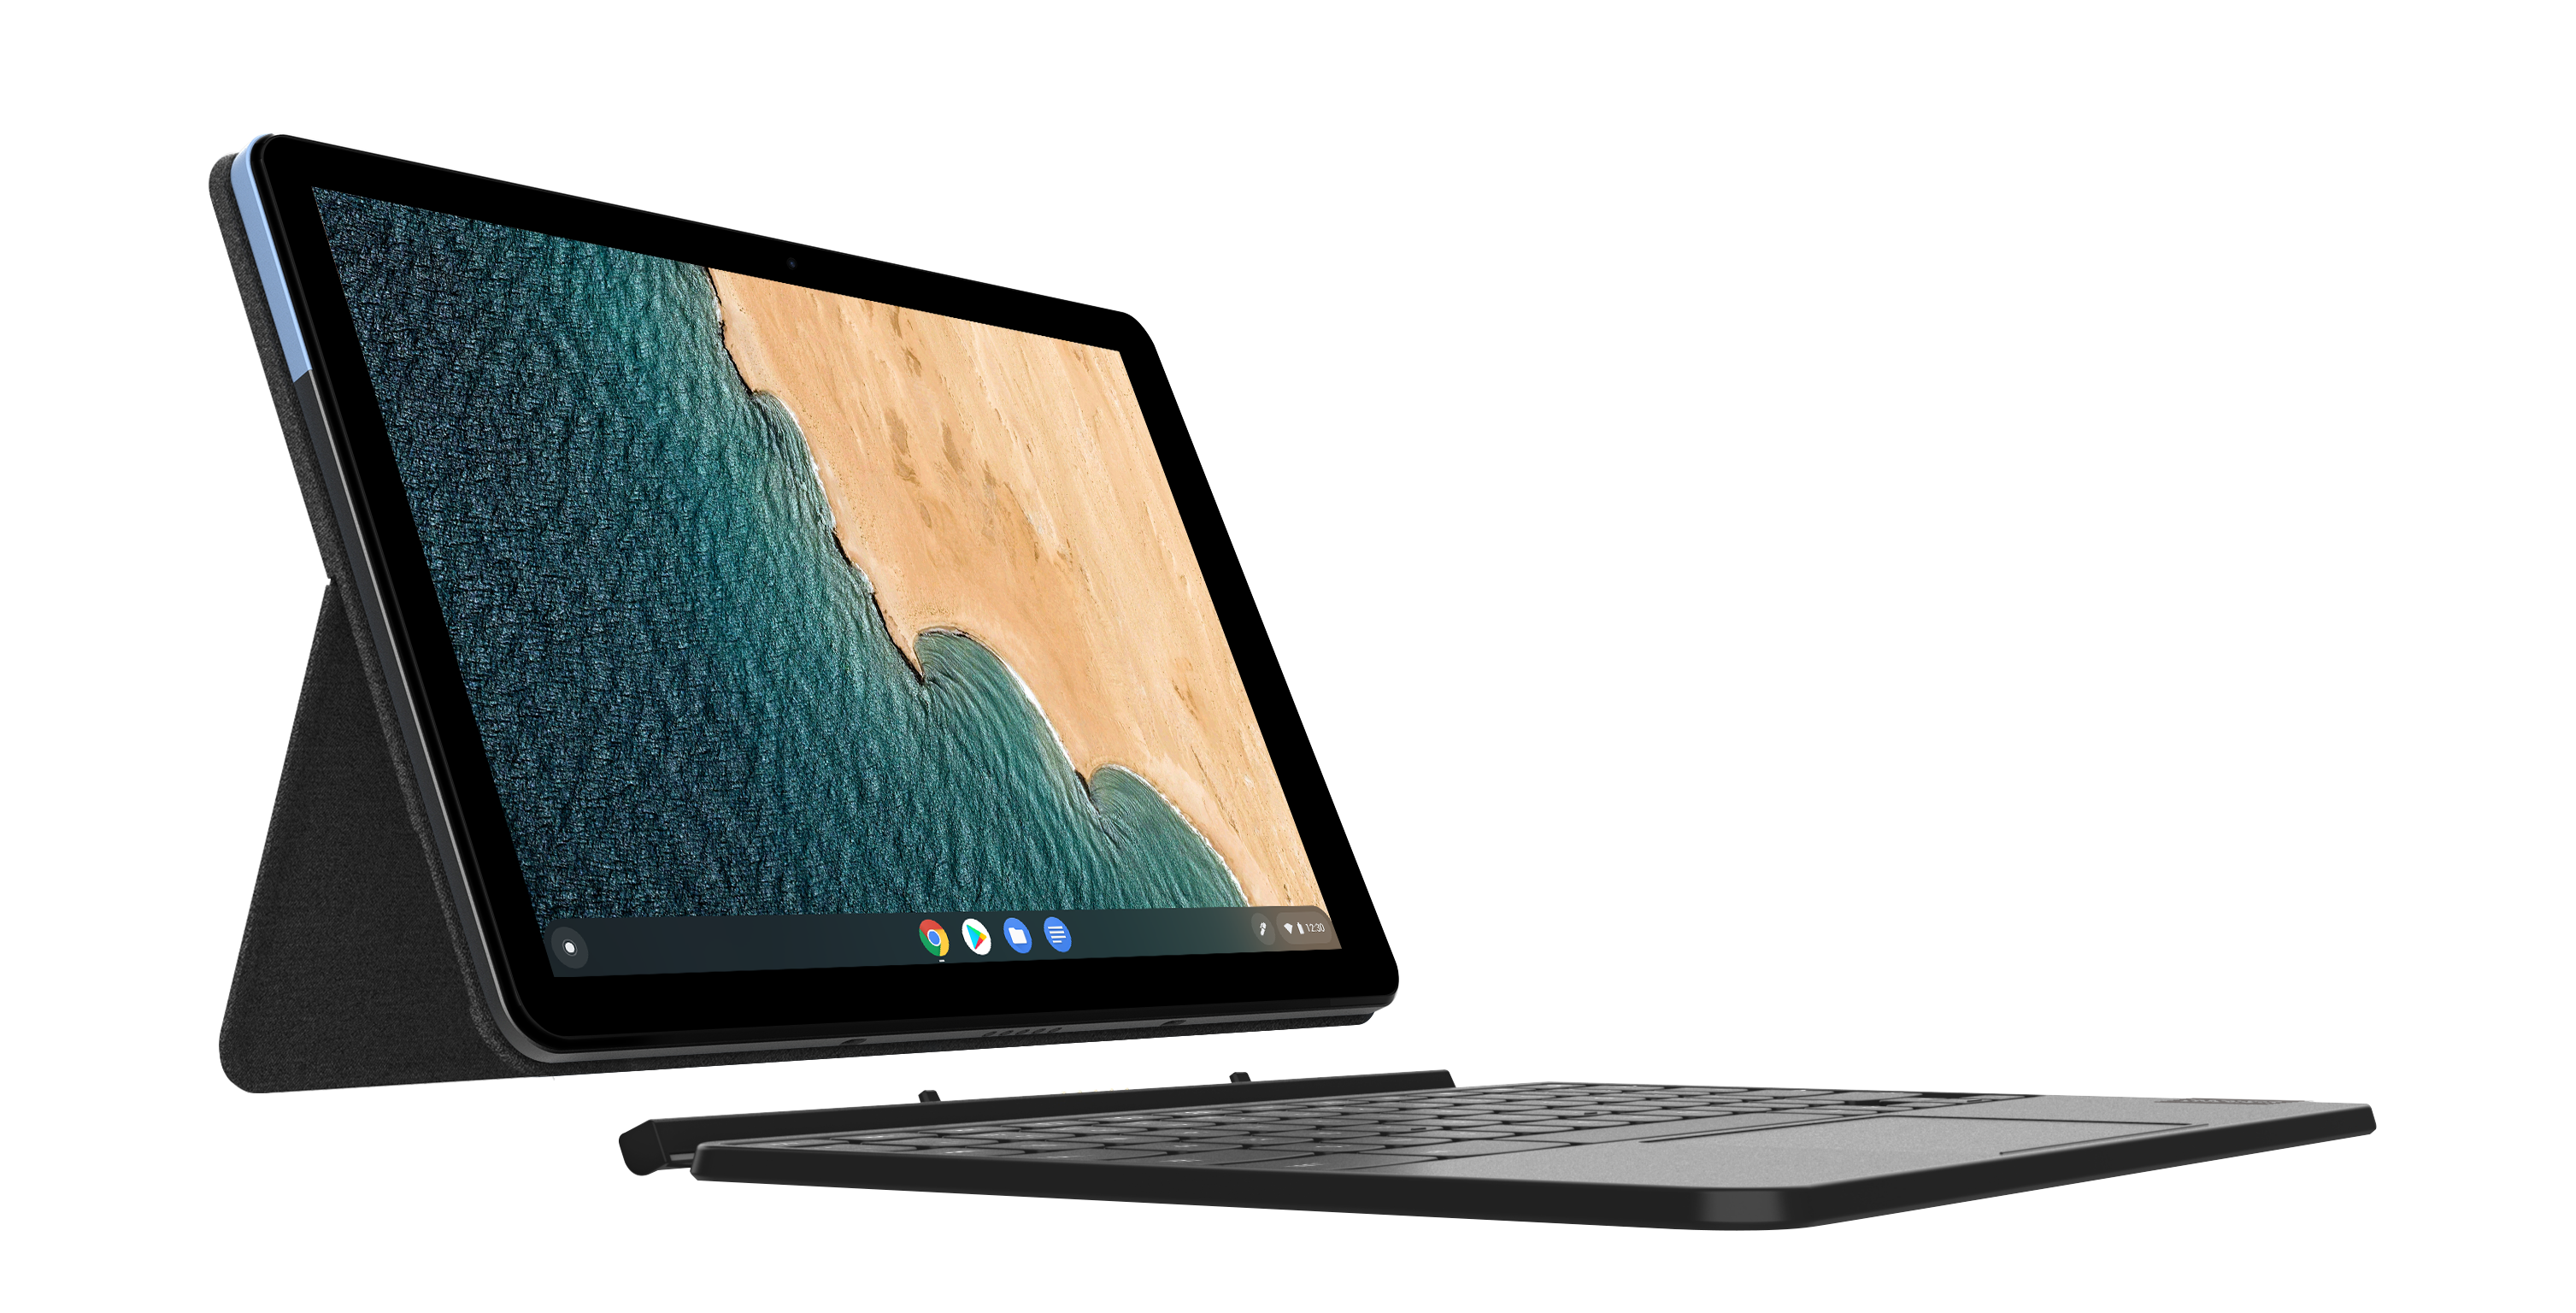 Official spec sheet outlines every aspect of the two Lenovo IdeaPad Duet Chromebook models